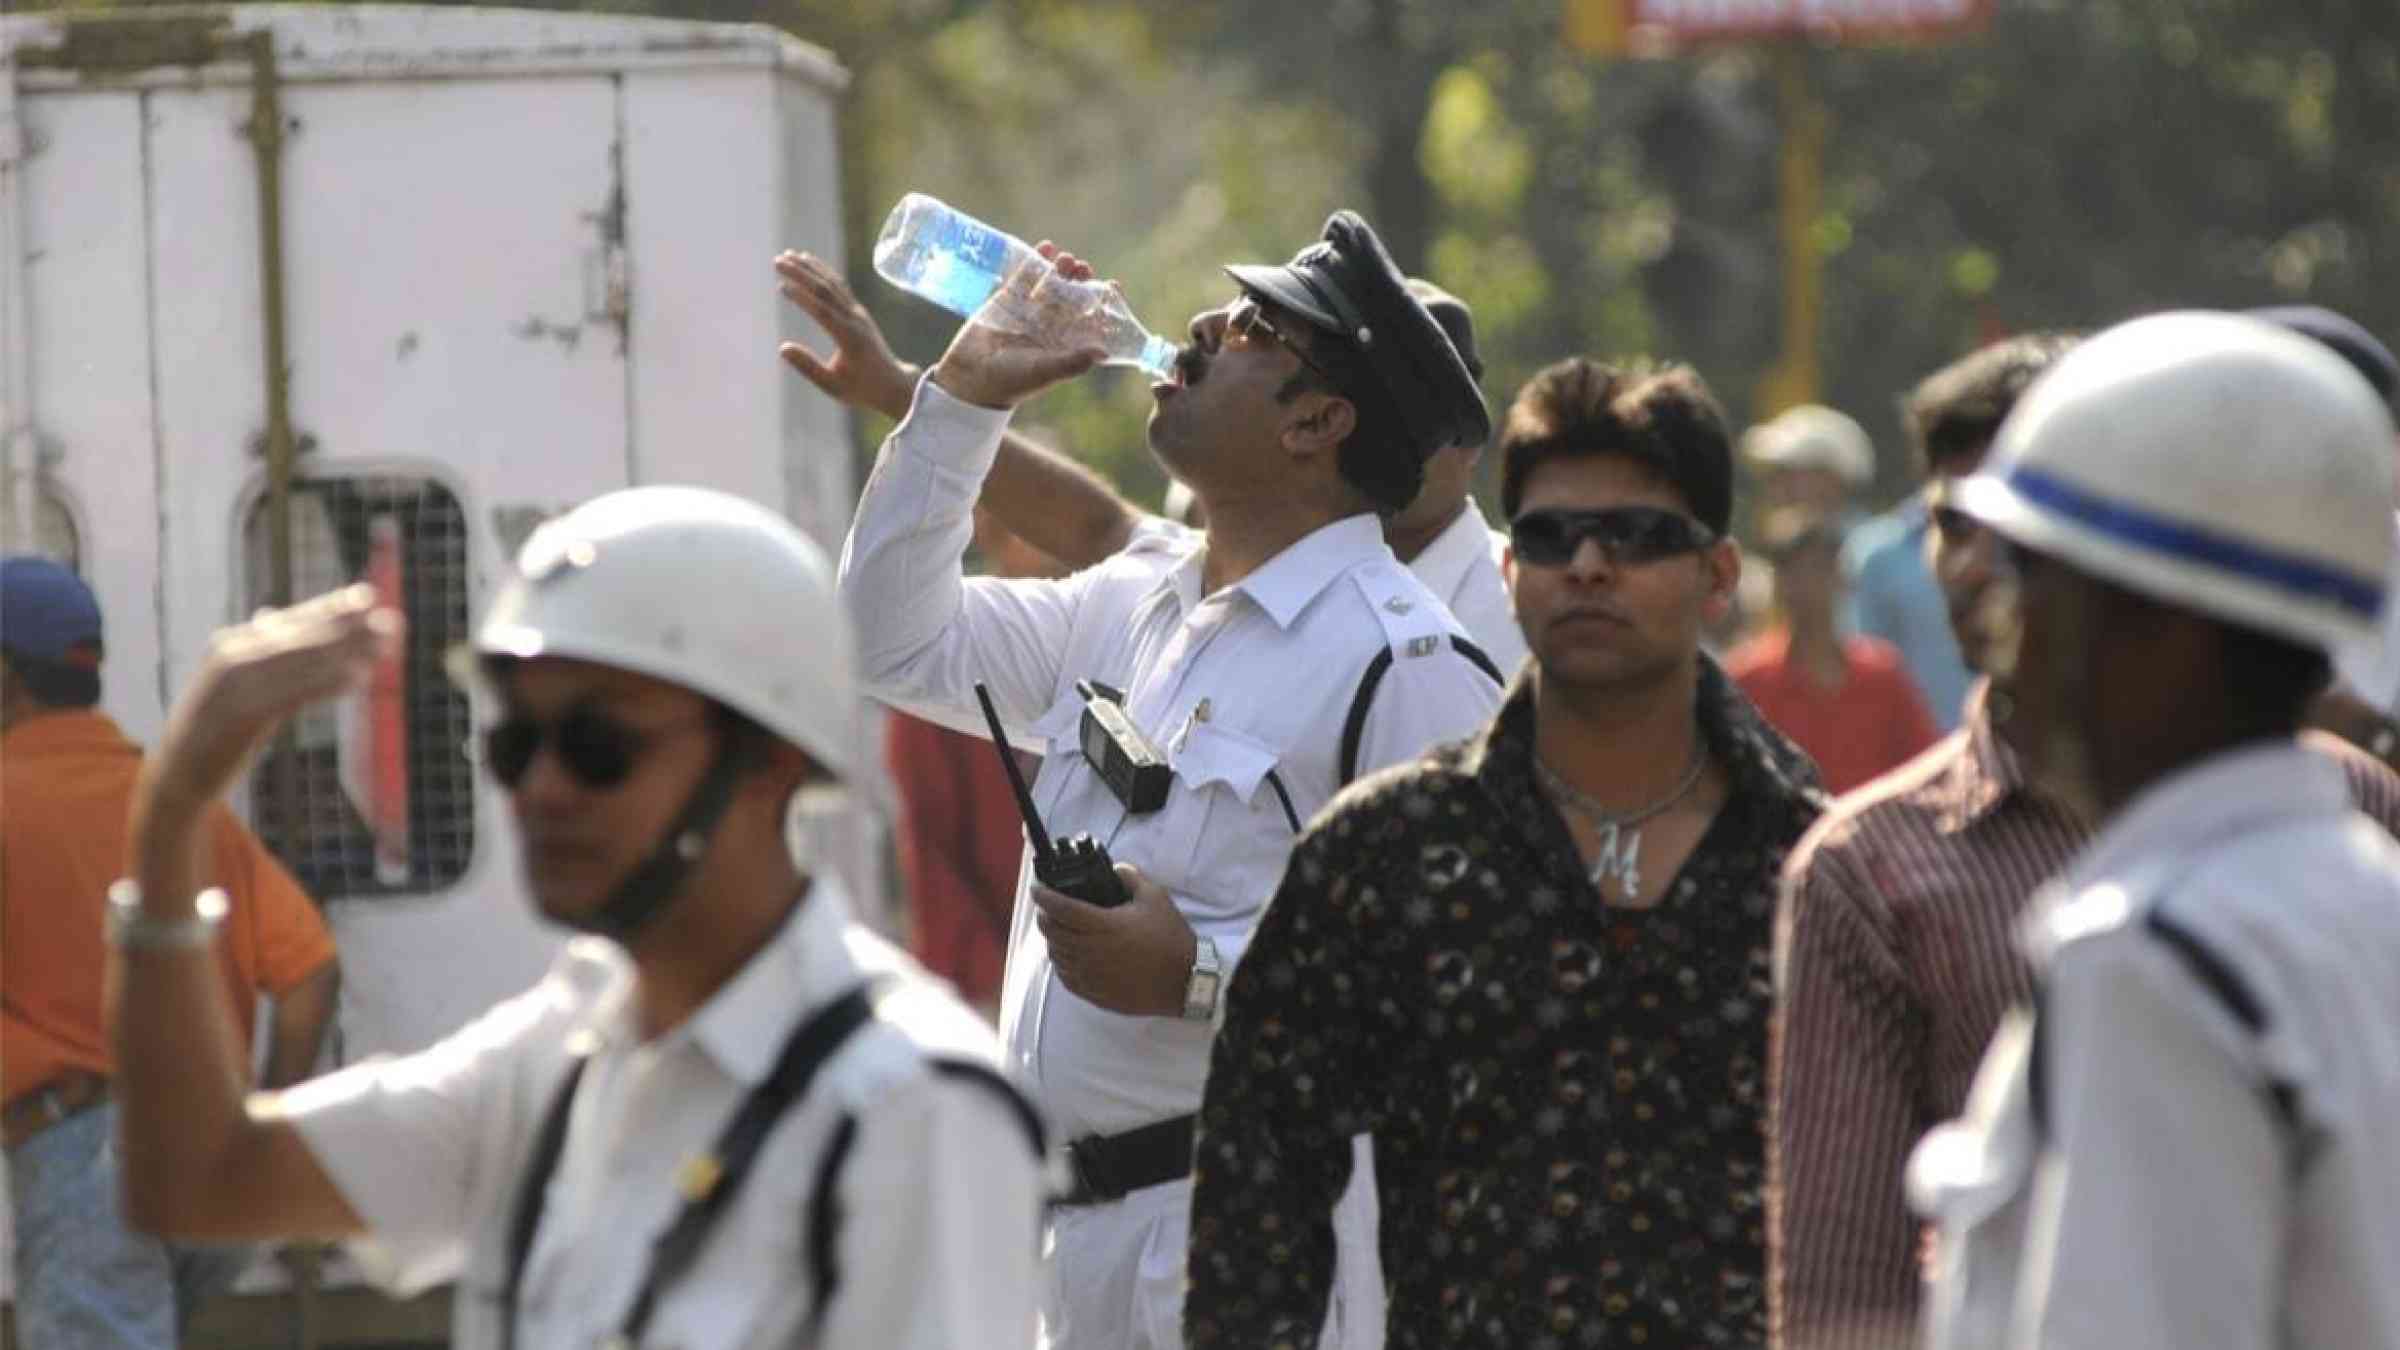 A traffic officer drinks water during a hot day in Kolkata, India